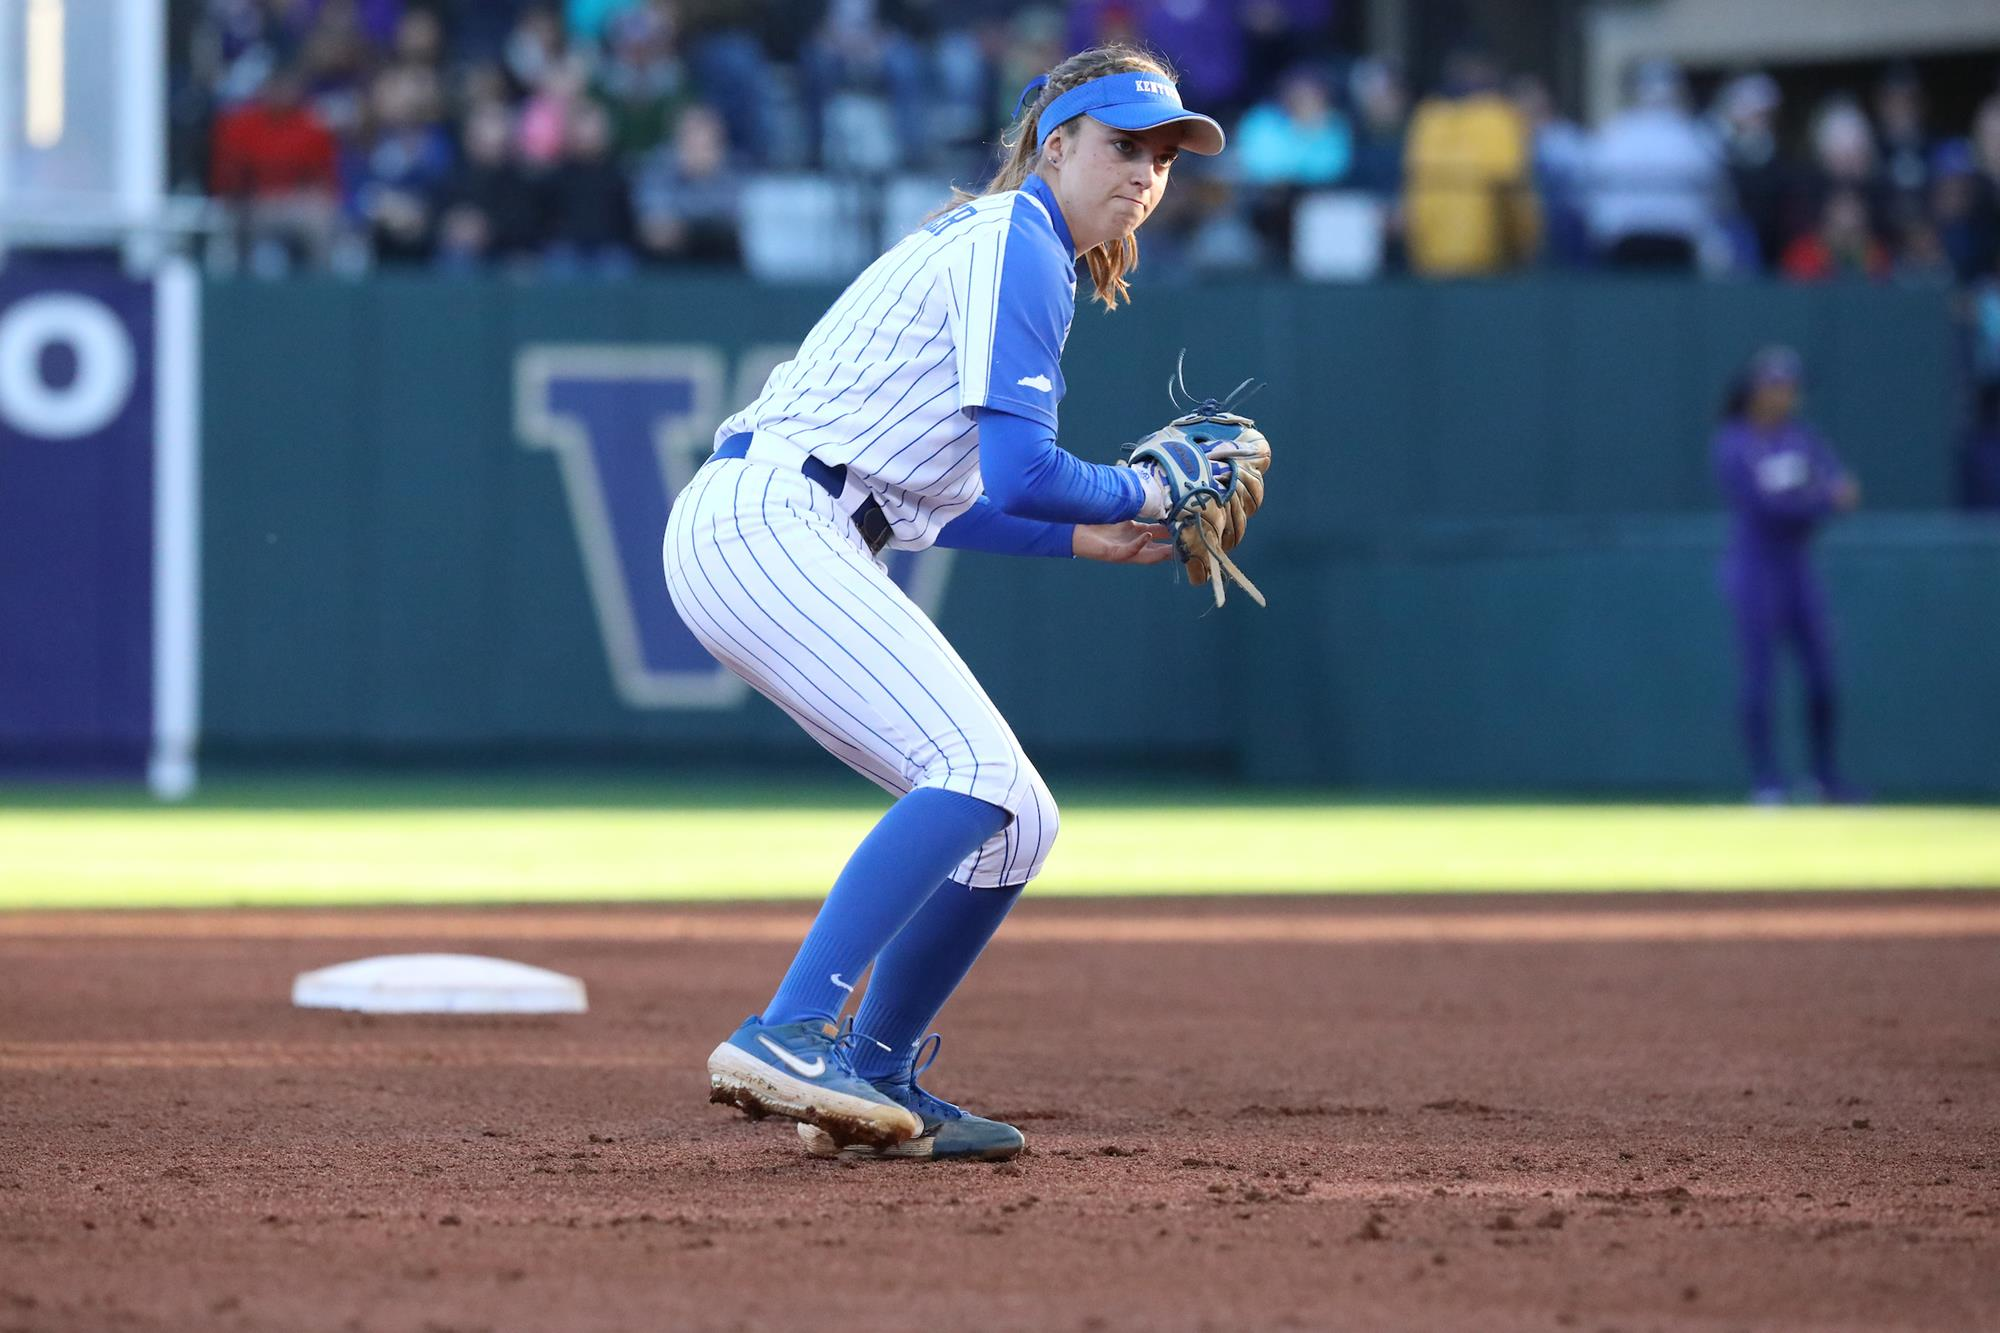 Martens Hits Two Bombs, Baalman Deals, UK Sweeps Opening Day